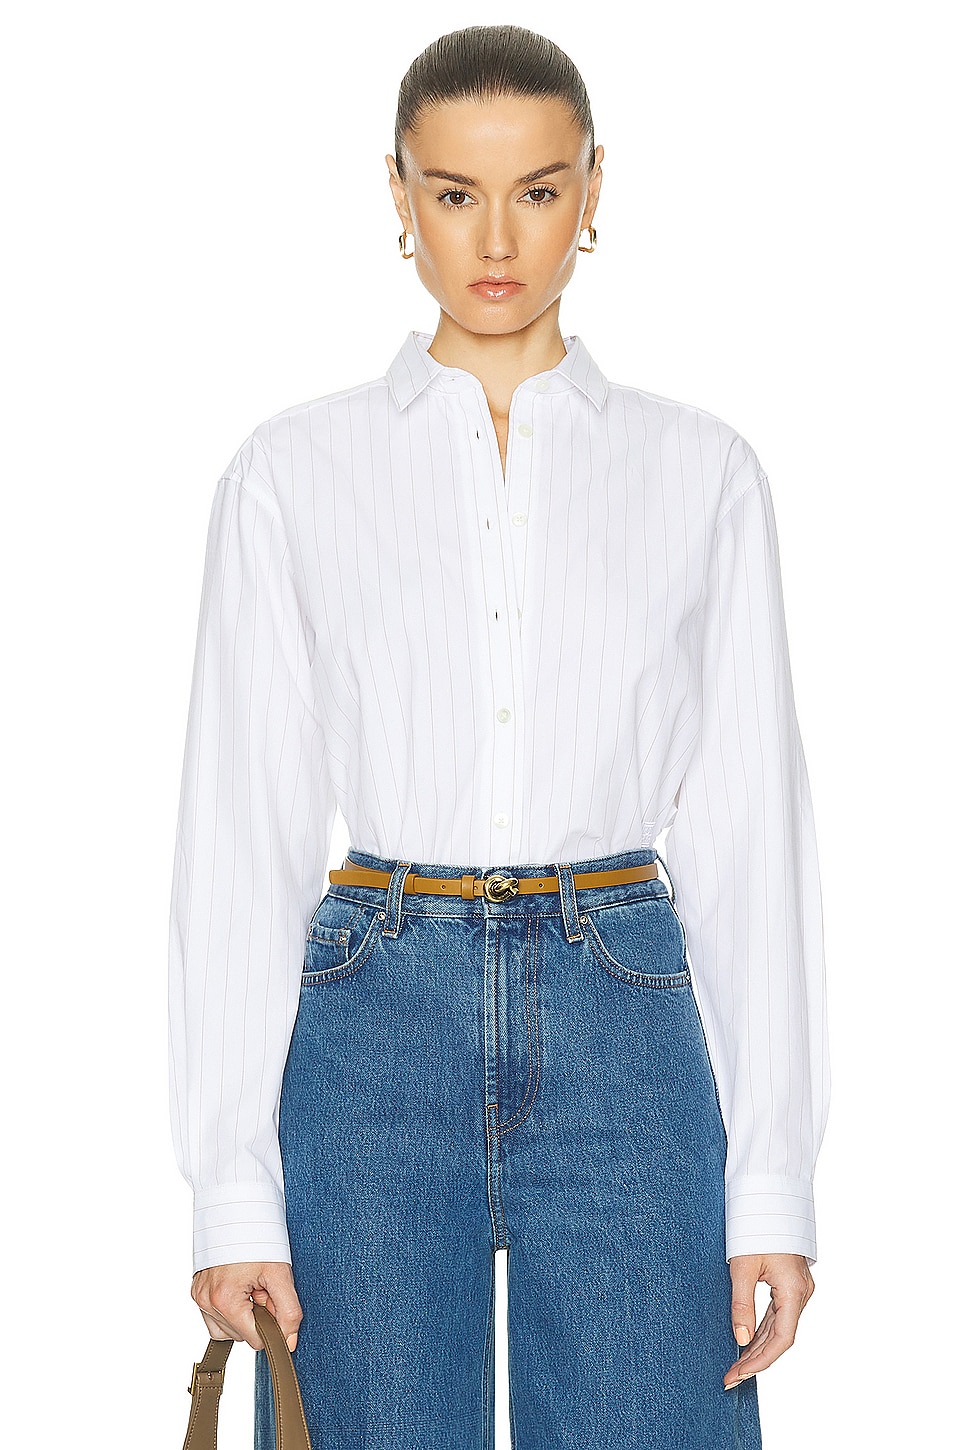 Image 1 of Toteme Signature Cotton Shirt in White & Ochre Pinstripe